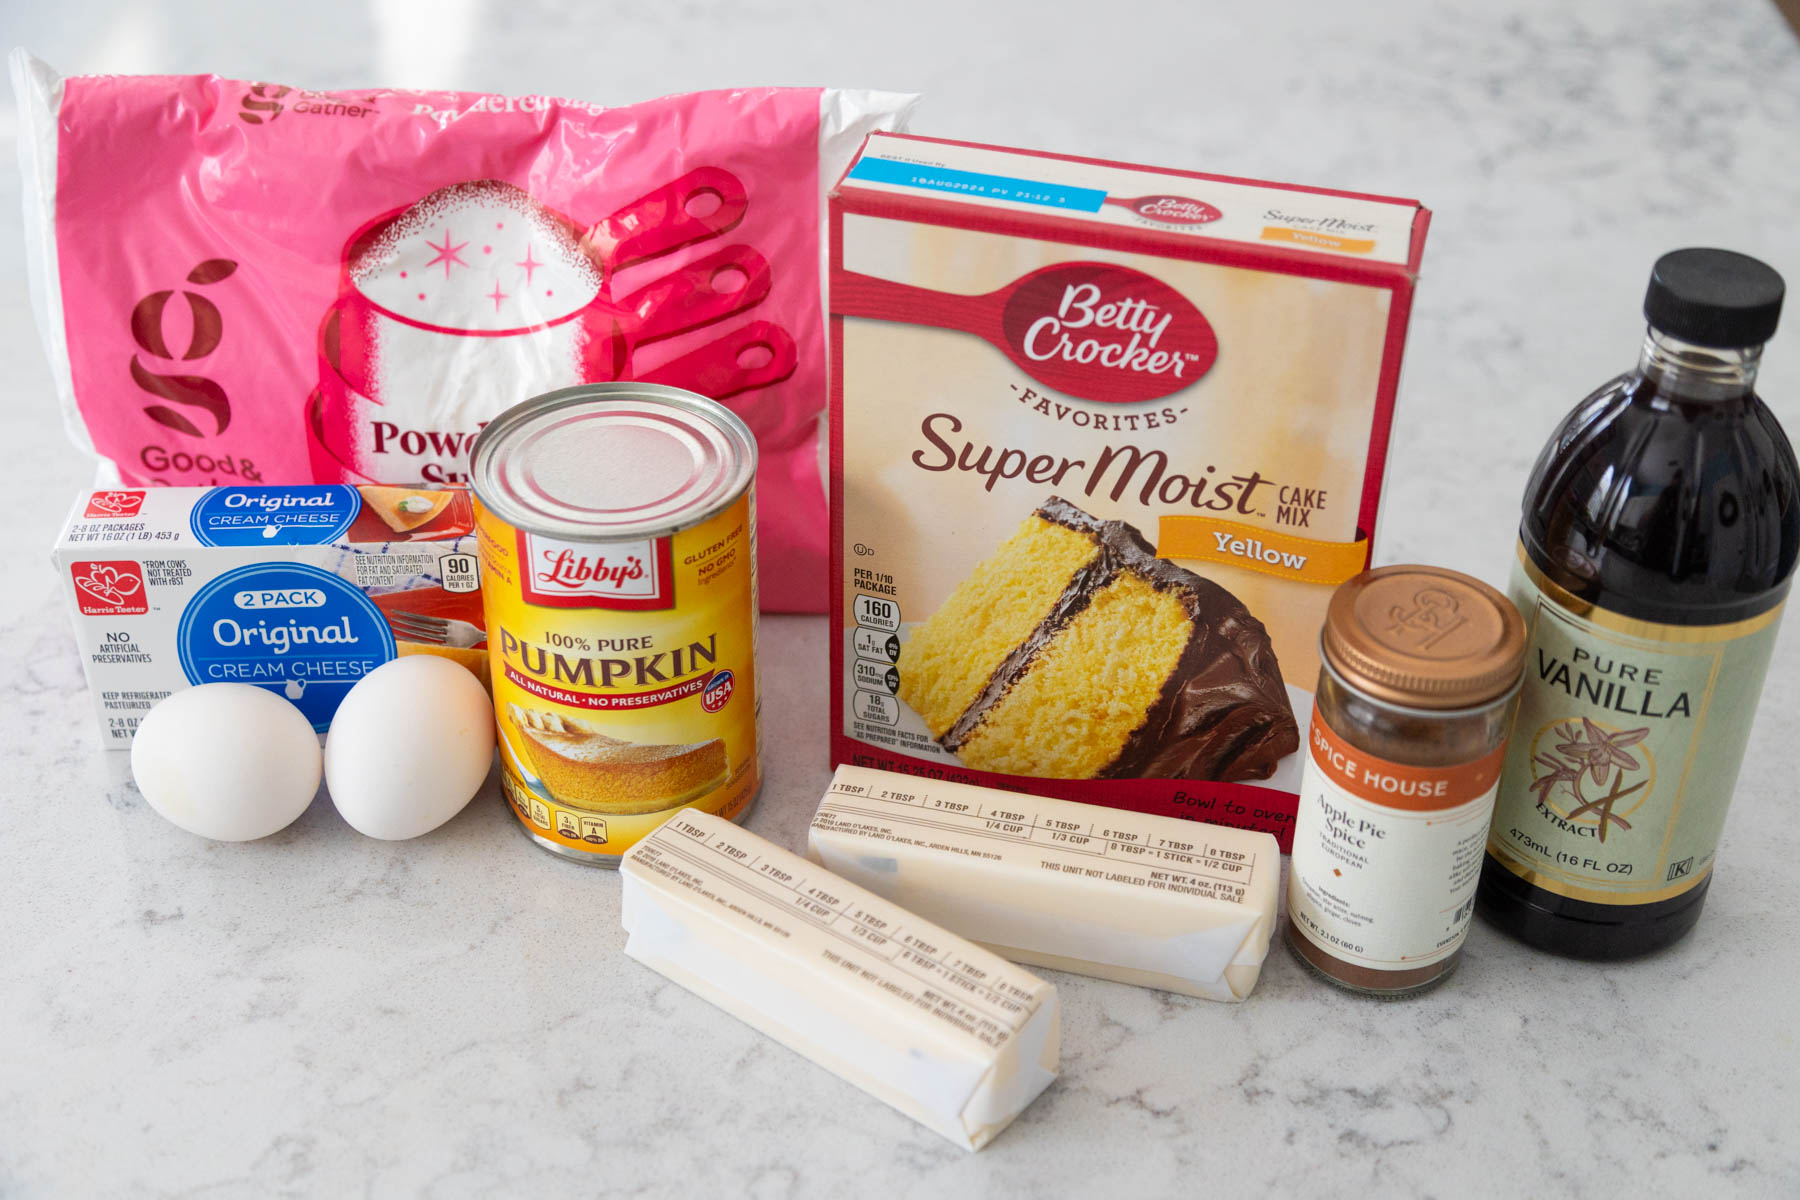 The ingredients to make the gooey butter cake are on the counter.